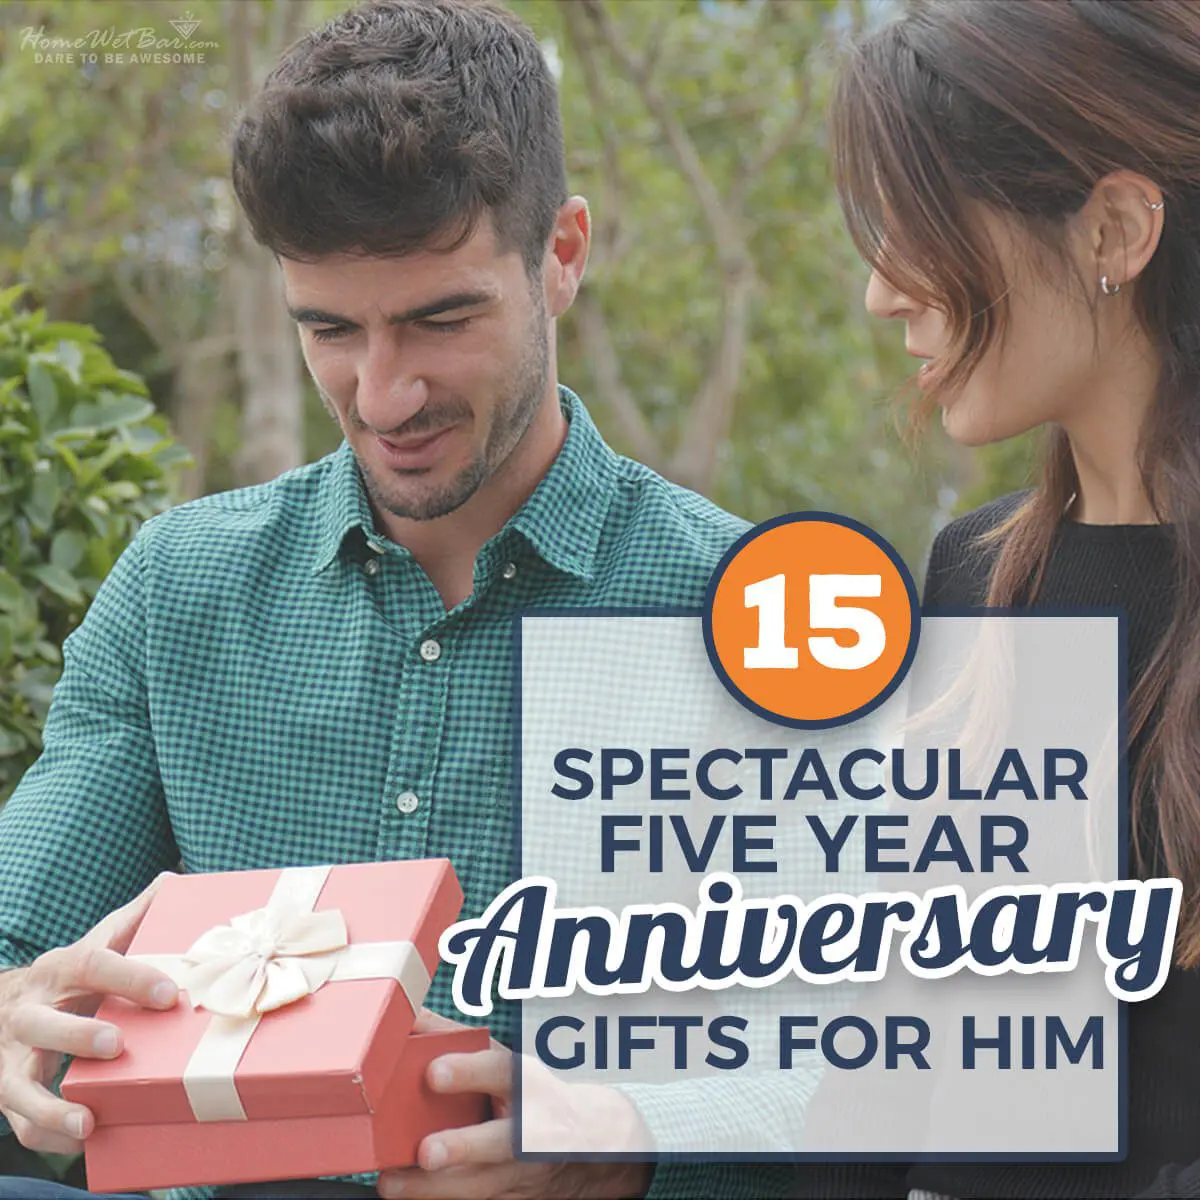 5 Year Anniversary Gifts For Him
 15 Spectacular 5 Year Anniversary Gifts for Him